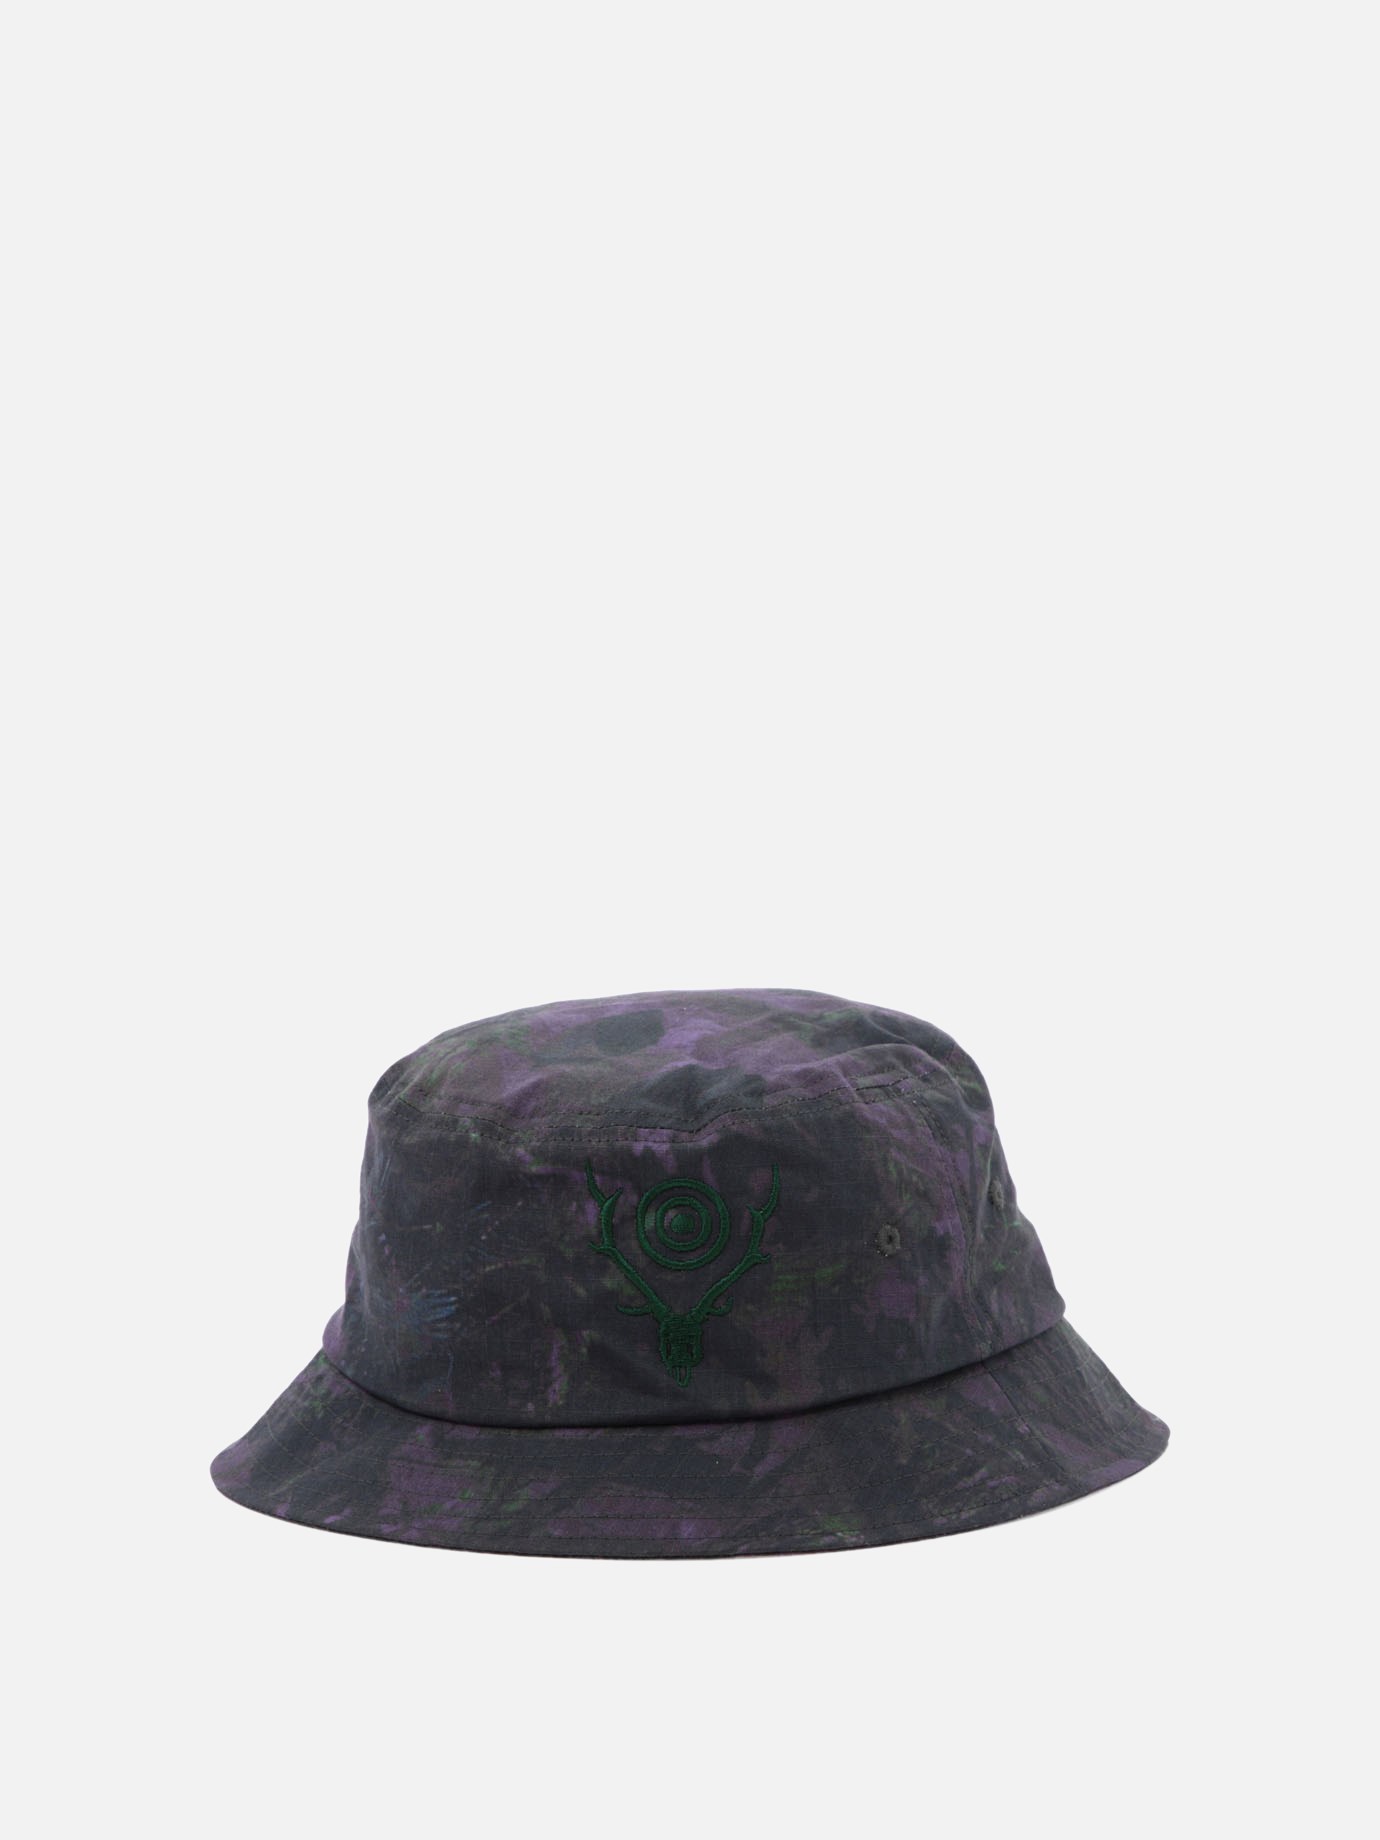 Bucket hat with embroideryby South2 West8 - 1